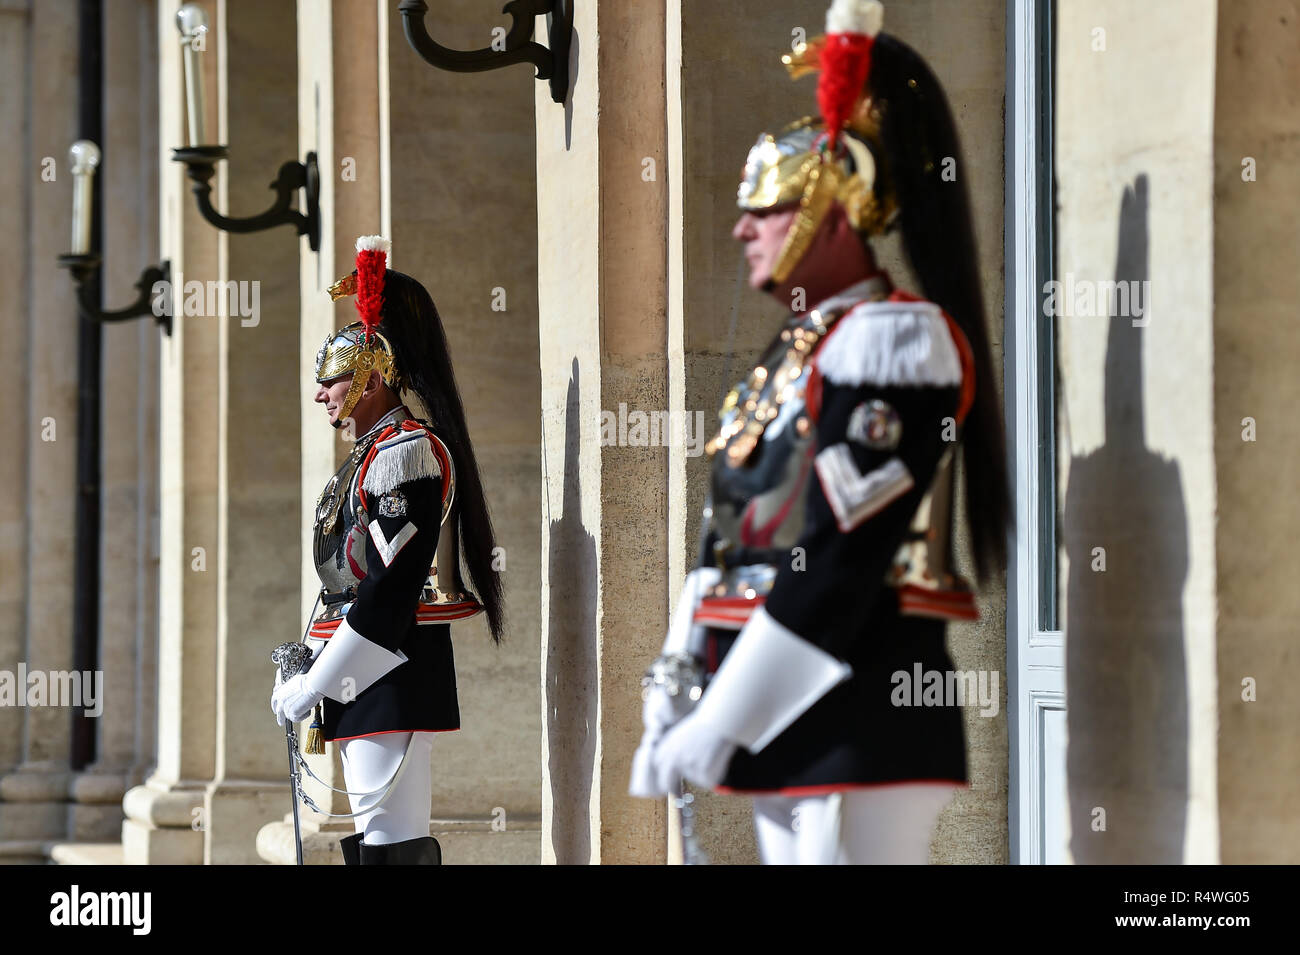 ROME, ITALY - OCTOBER 15, 2018: Italian national guard of honor during a welcome ceremony at the Quirinale Palace. Stock Photo